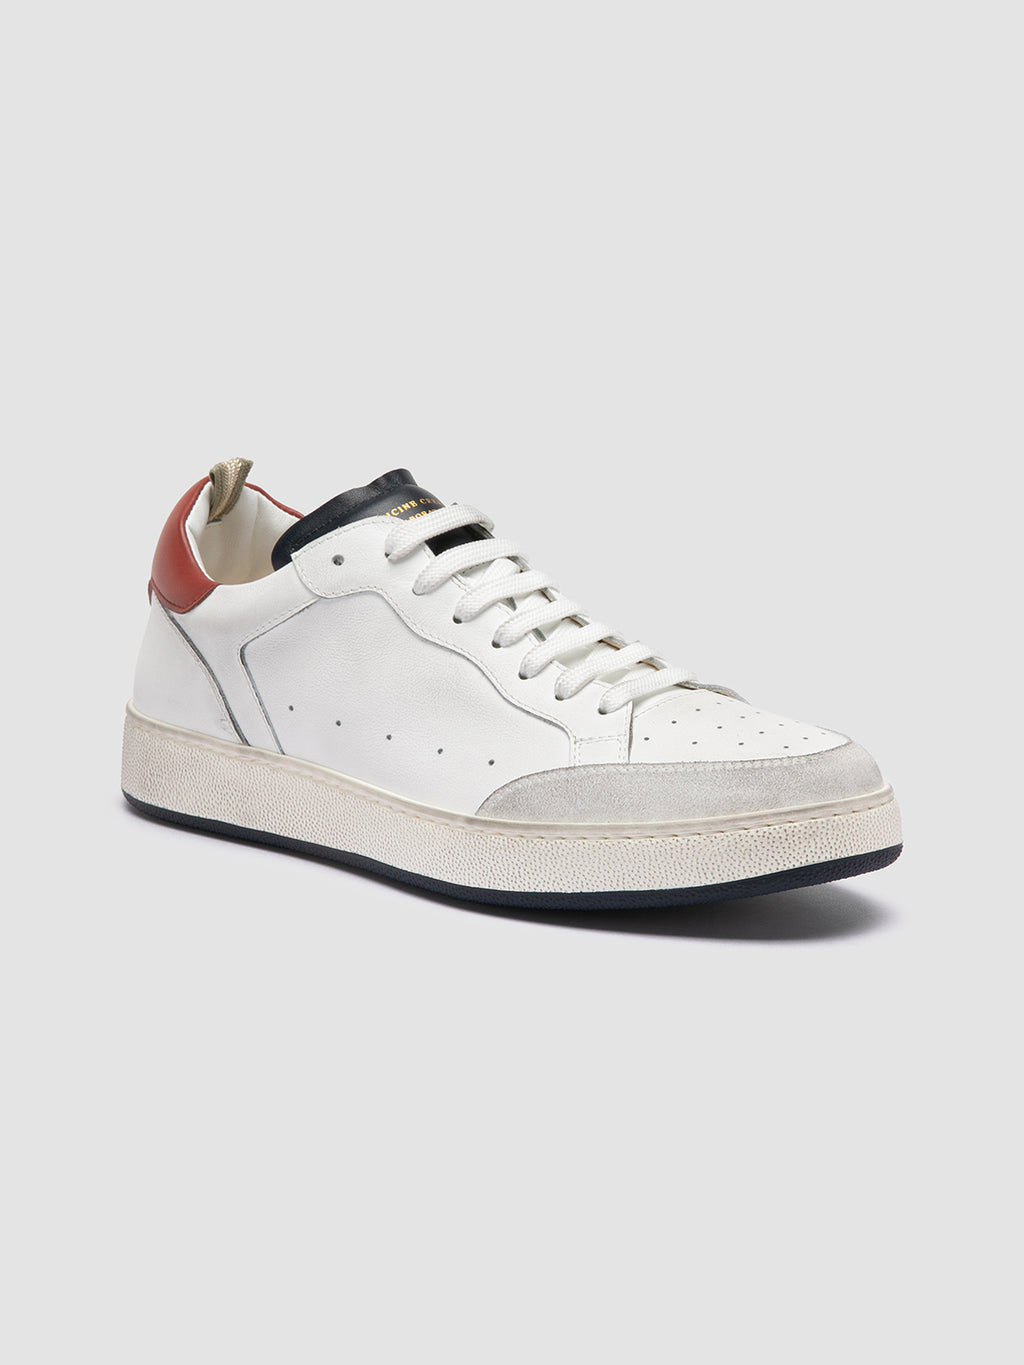 THE ANSWER 001 - White Leather and Suede Low Top Sneakers